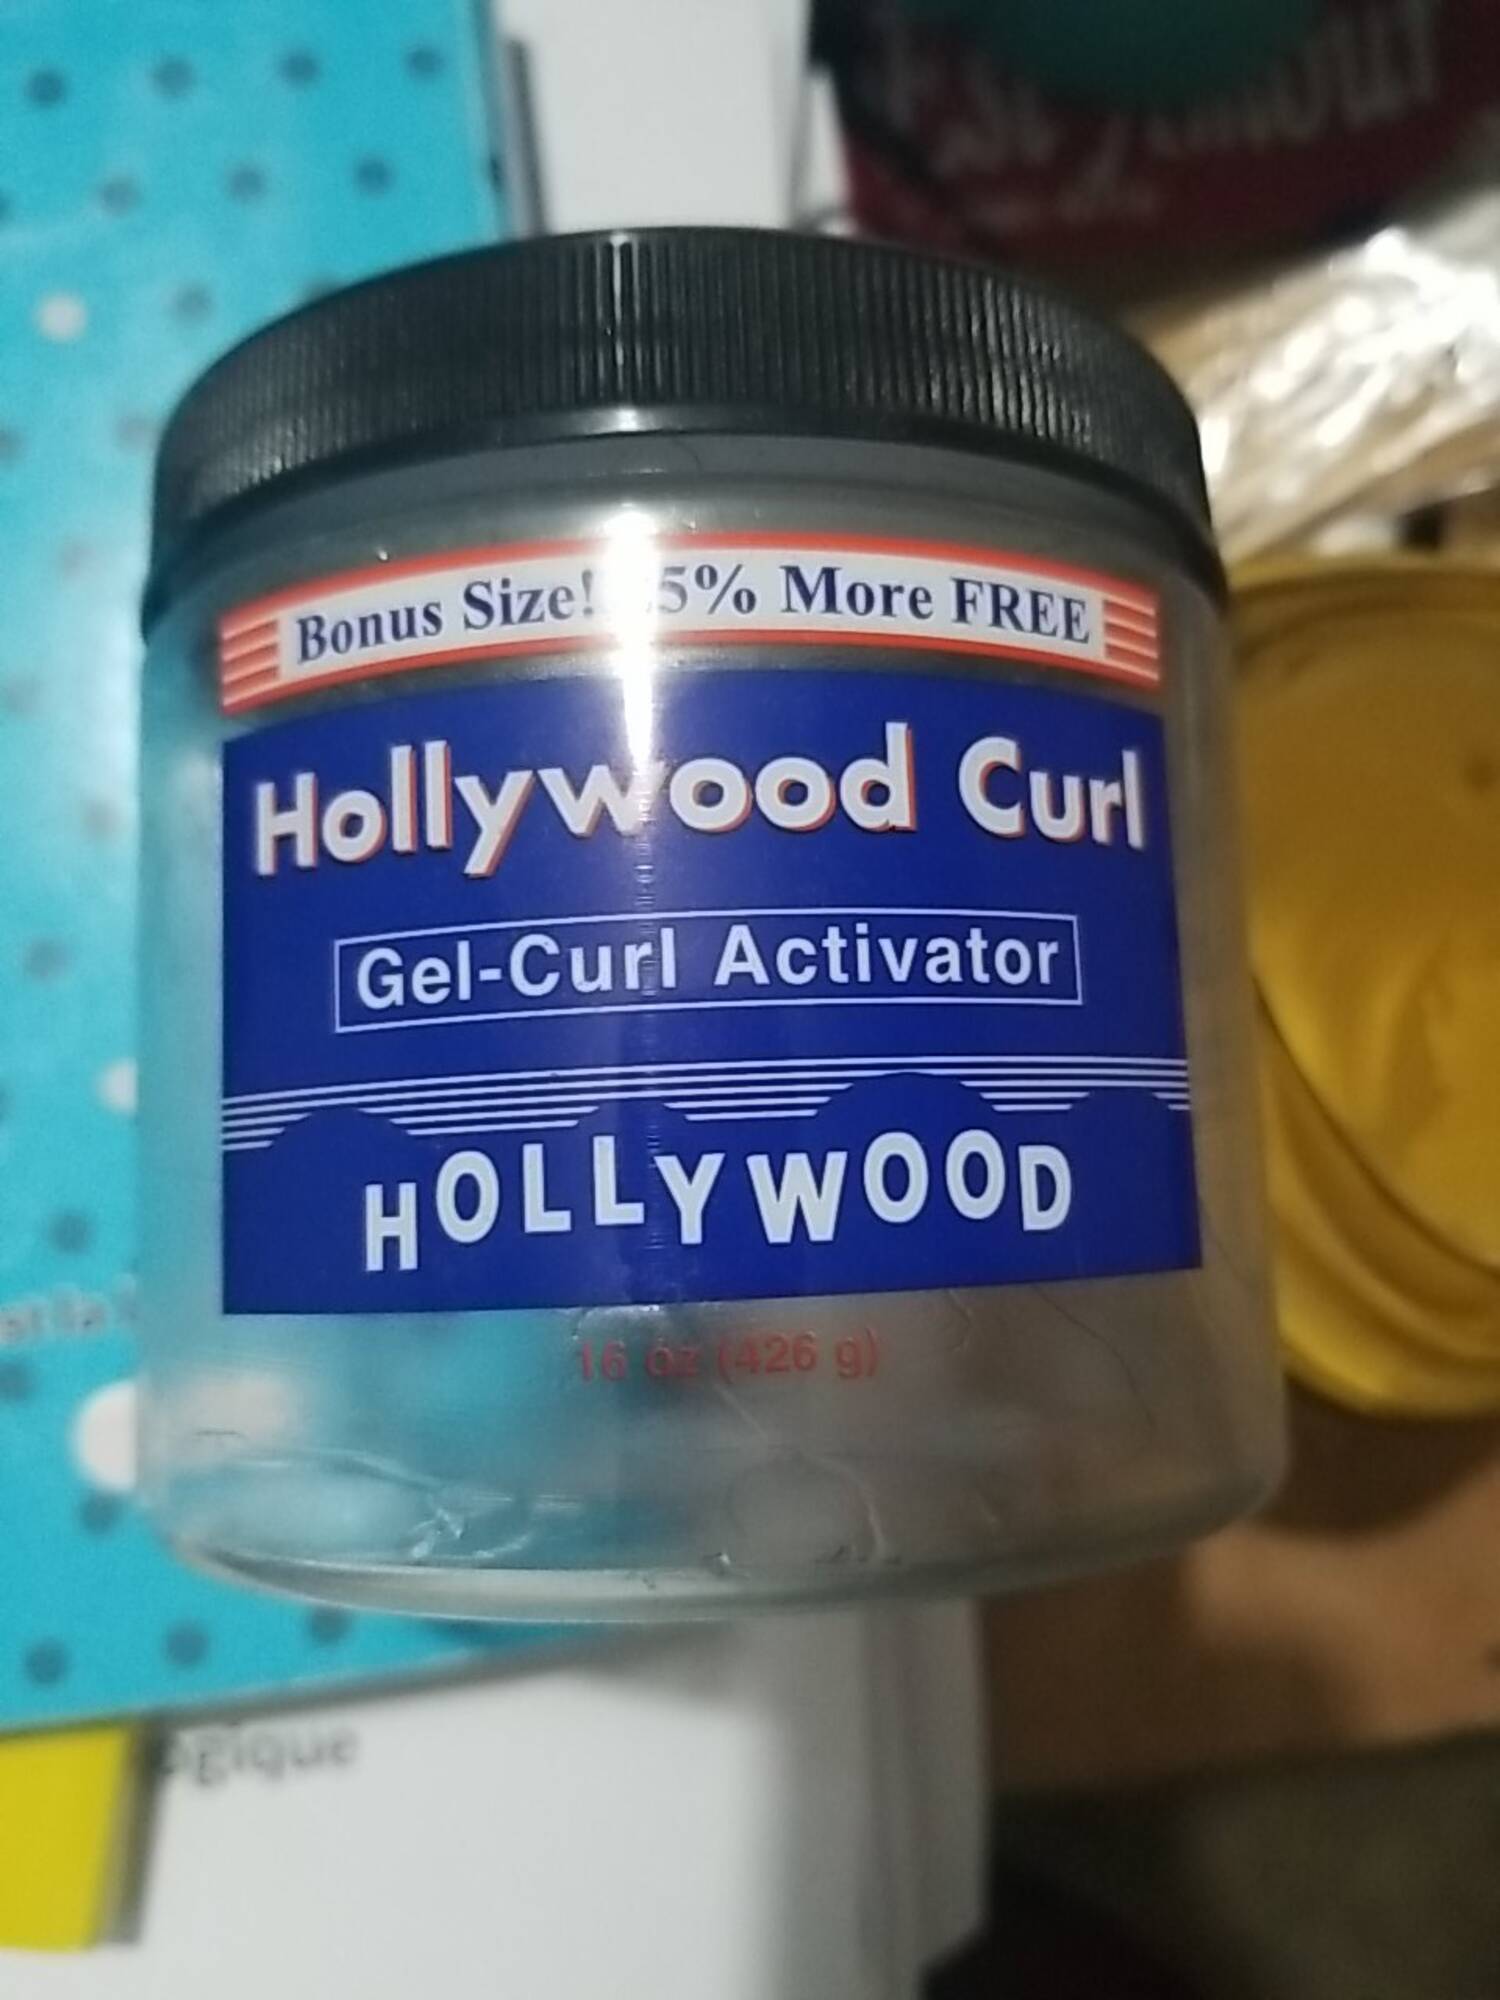 HOLLYWOOD - Hollywood curl - Gel-curl activator